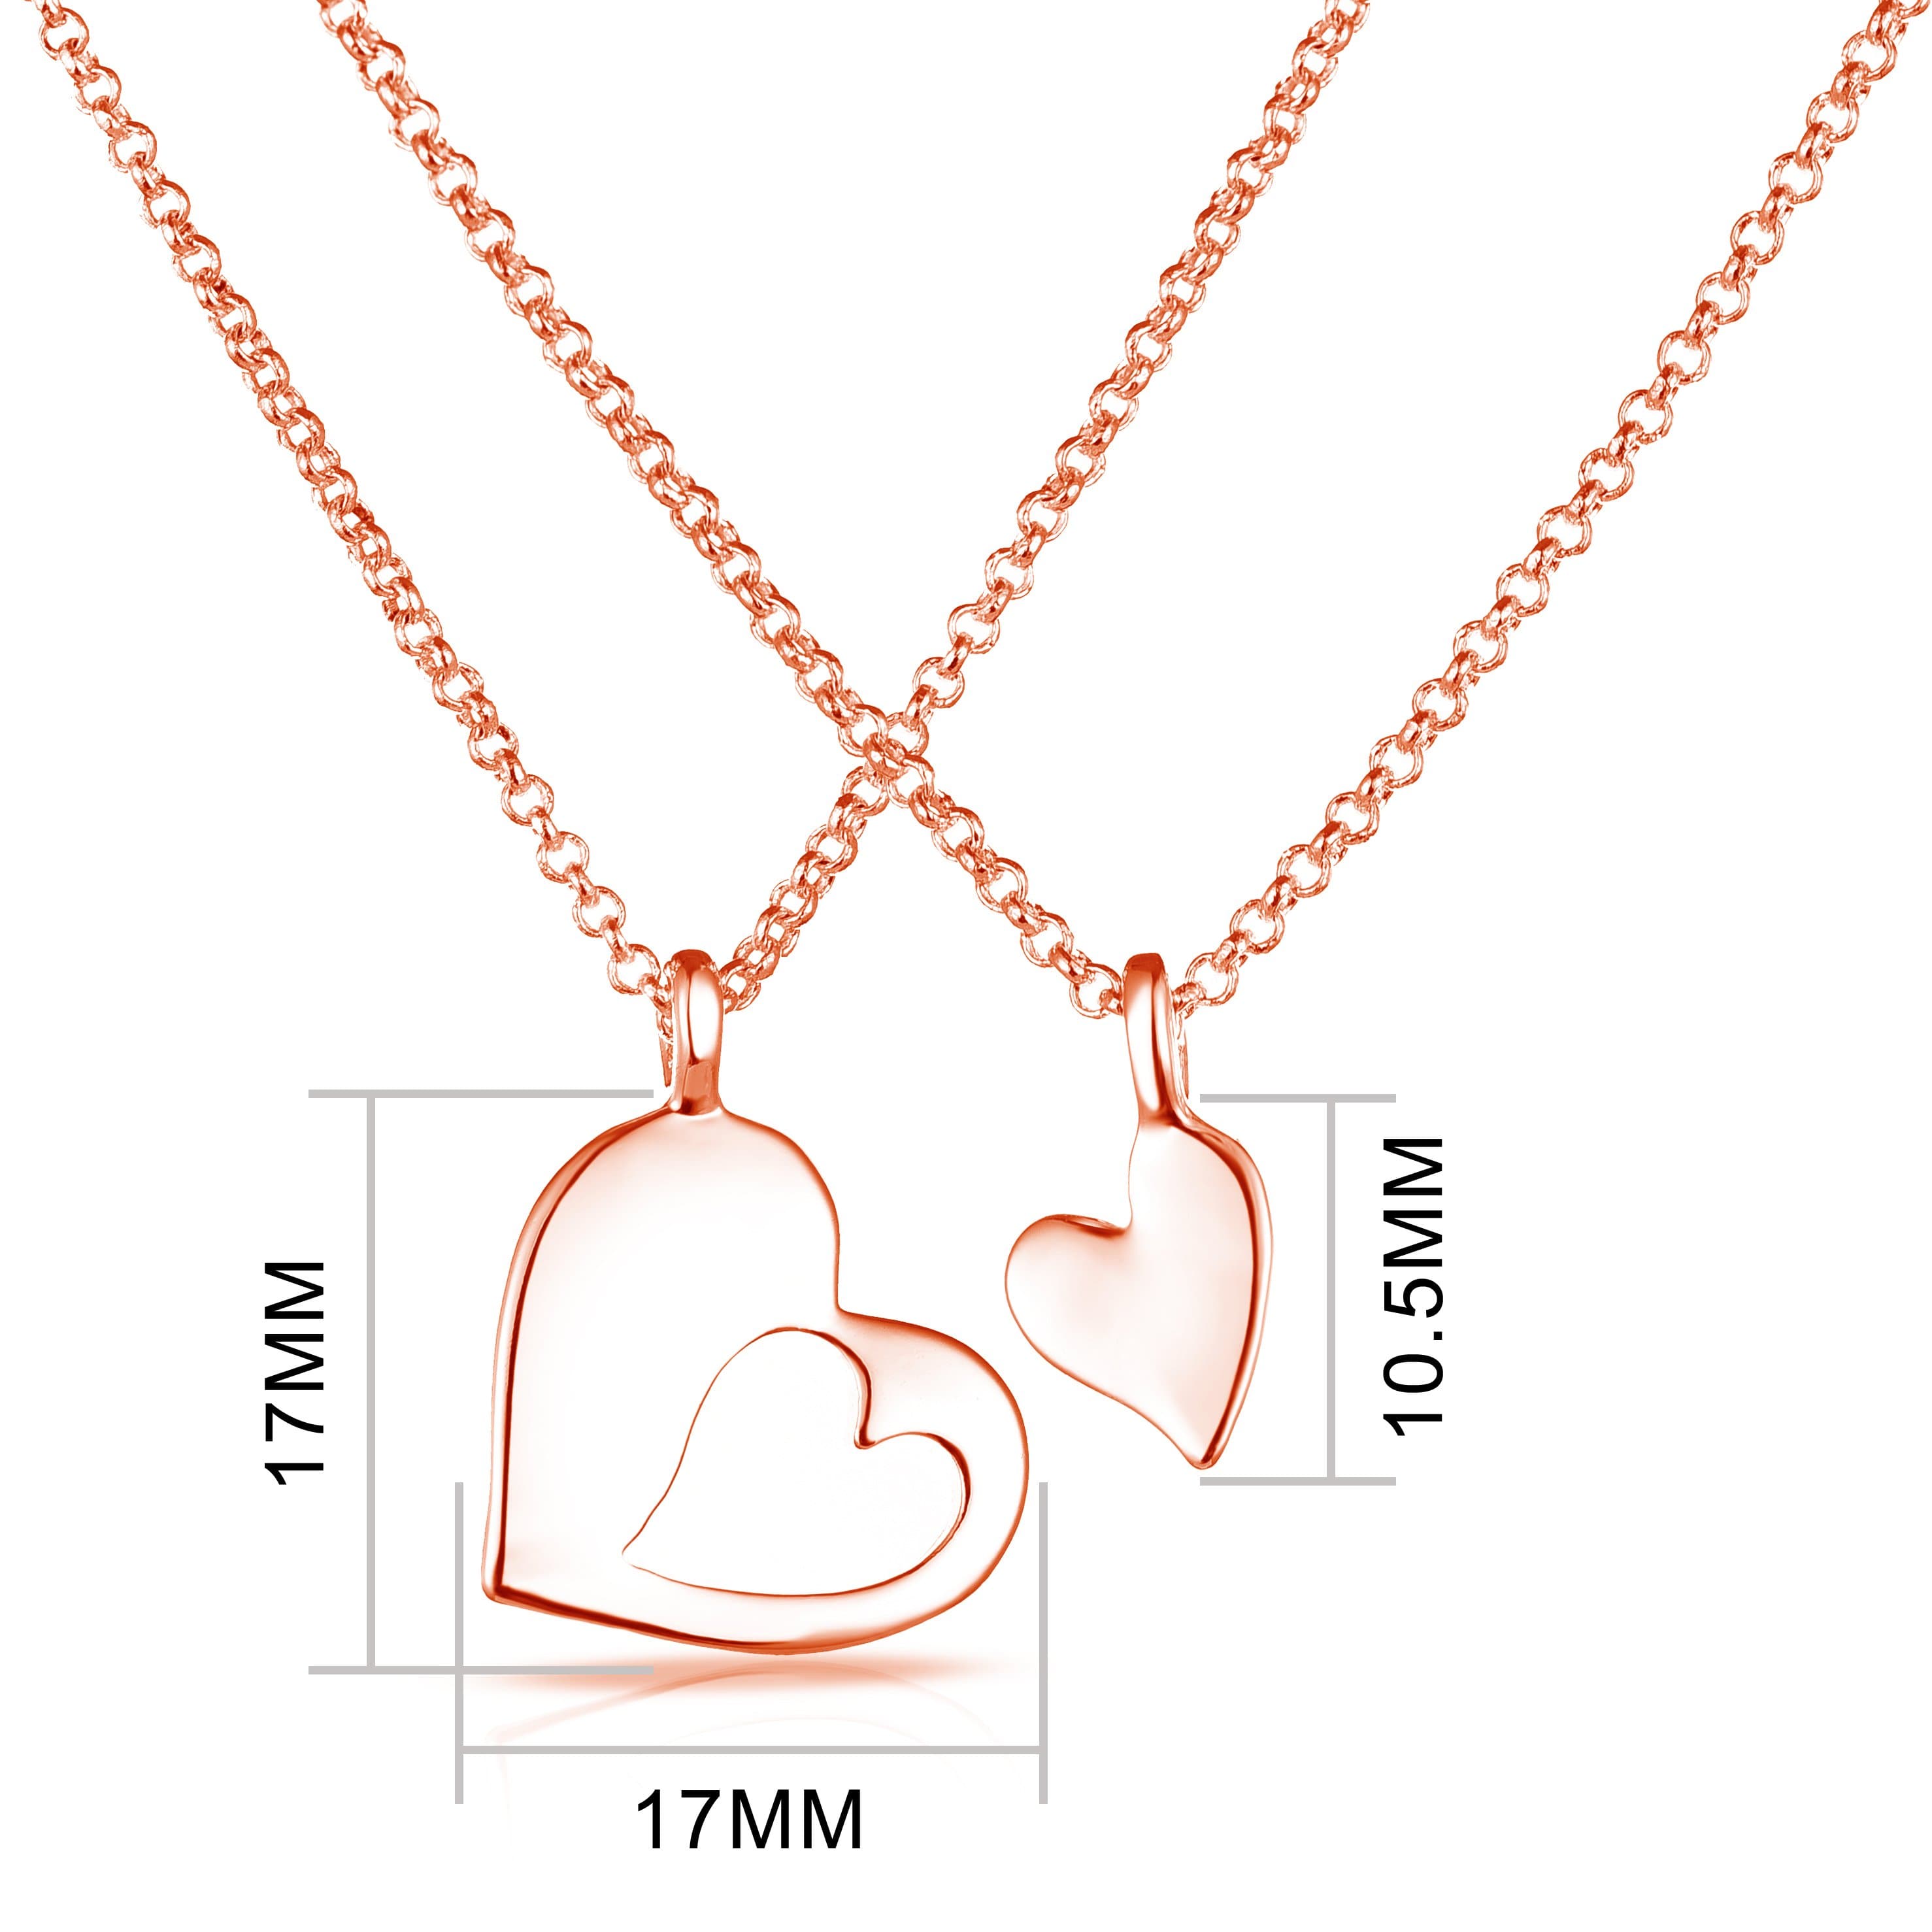 Rose Gold Plated Big Sister Little Sister Piece of My Heart Necklace Set